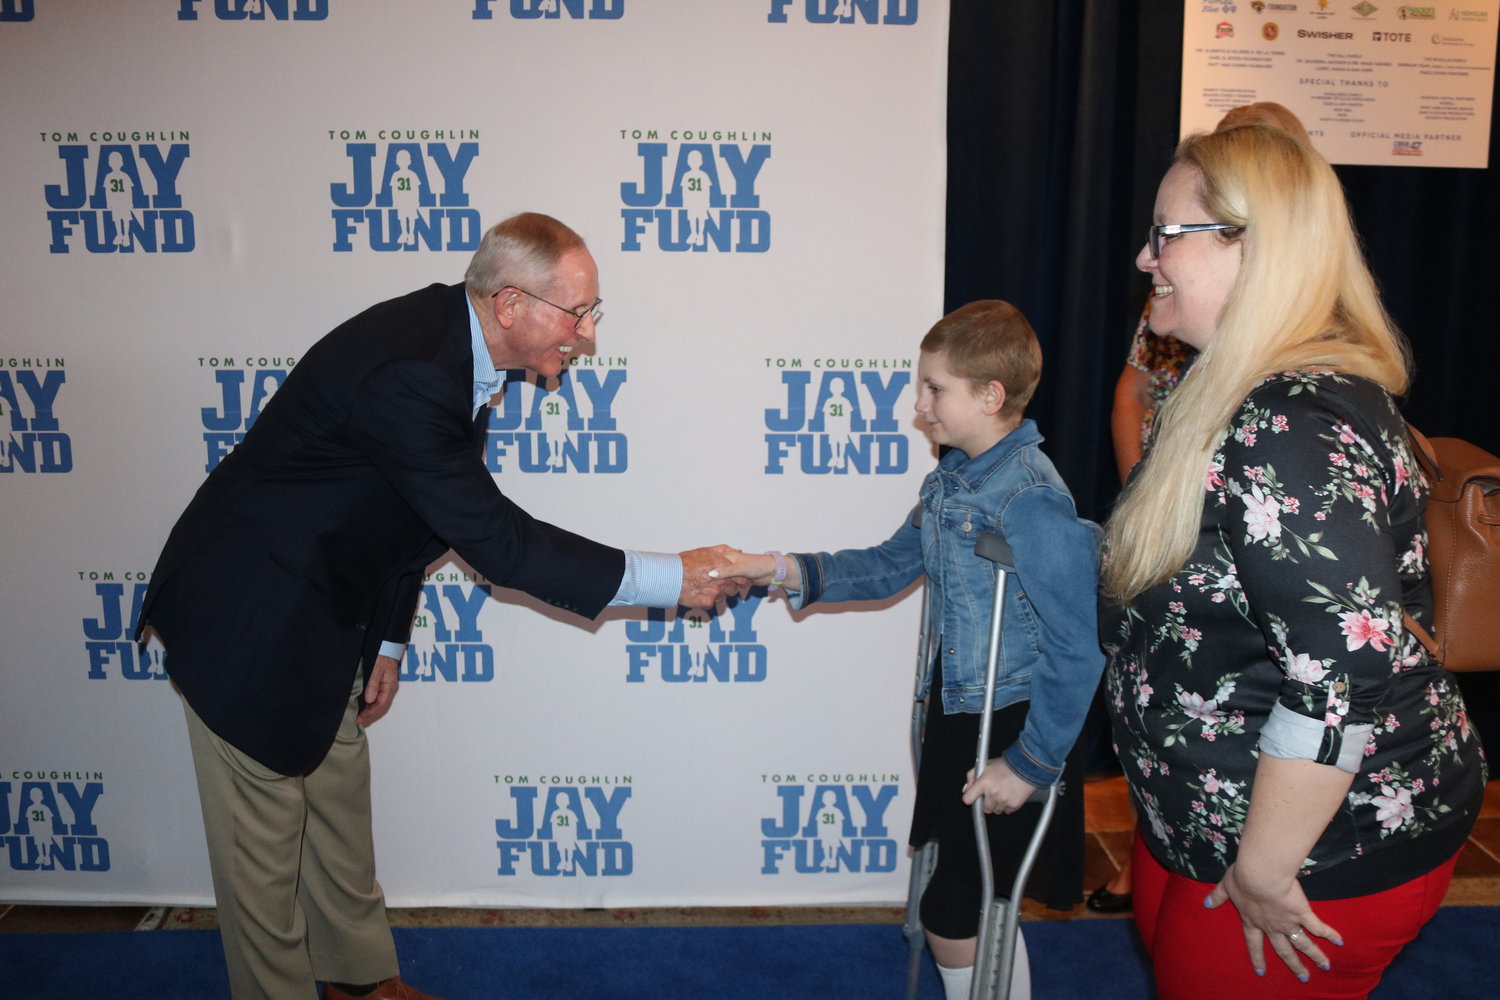 Tom Coughlin started the Jay Fund years ago with the mission of helping families and children battling cancer.